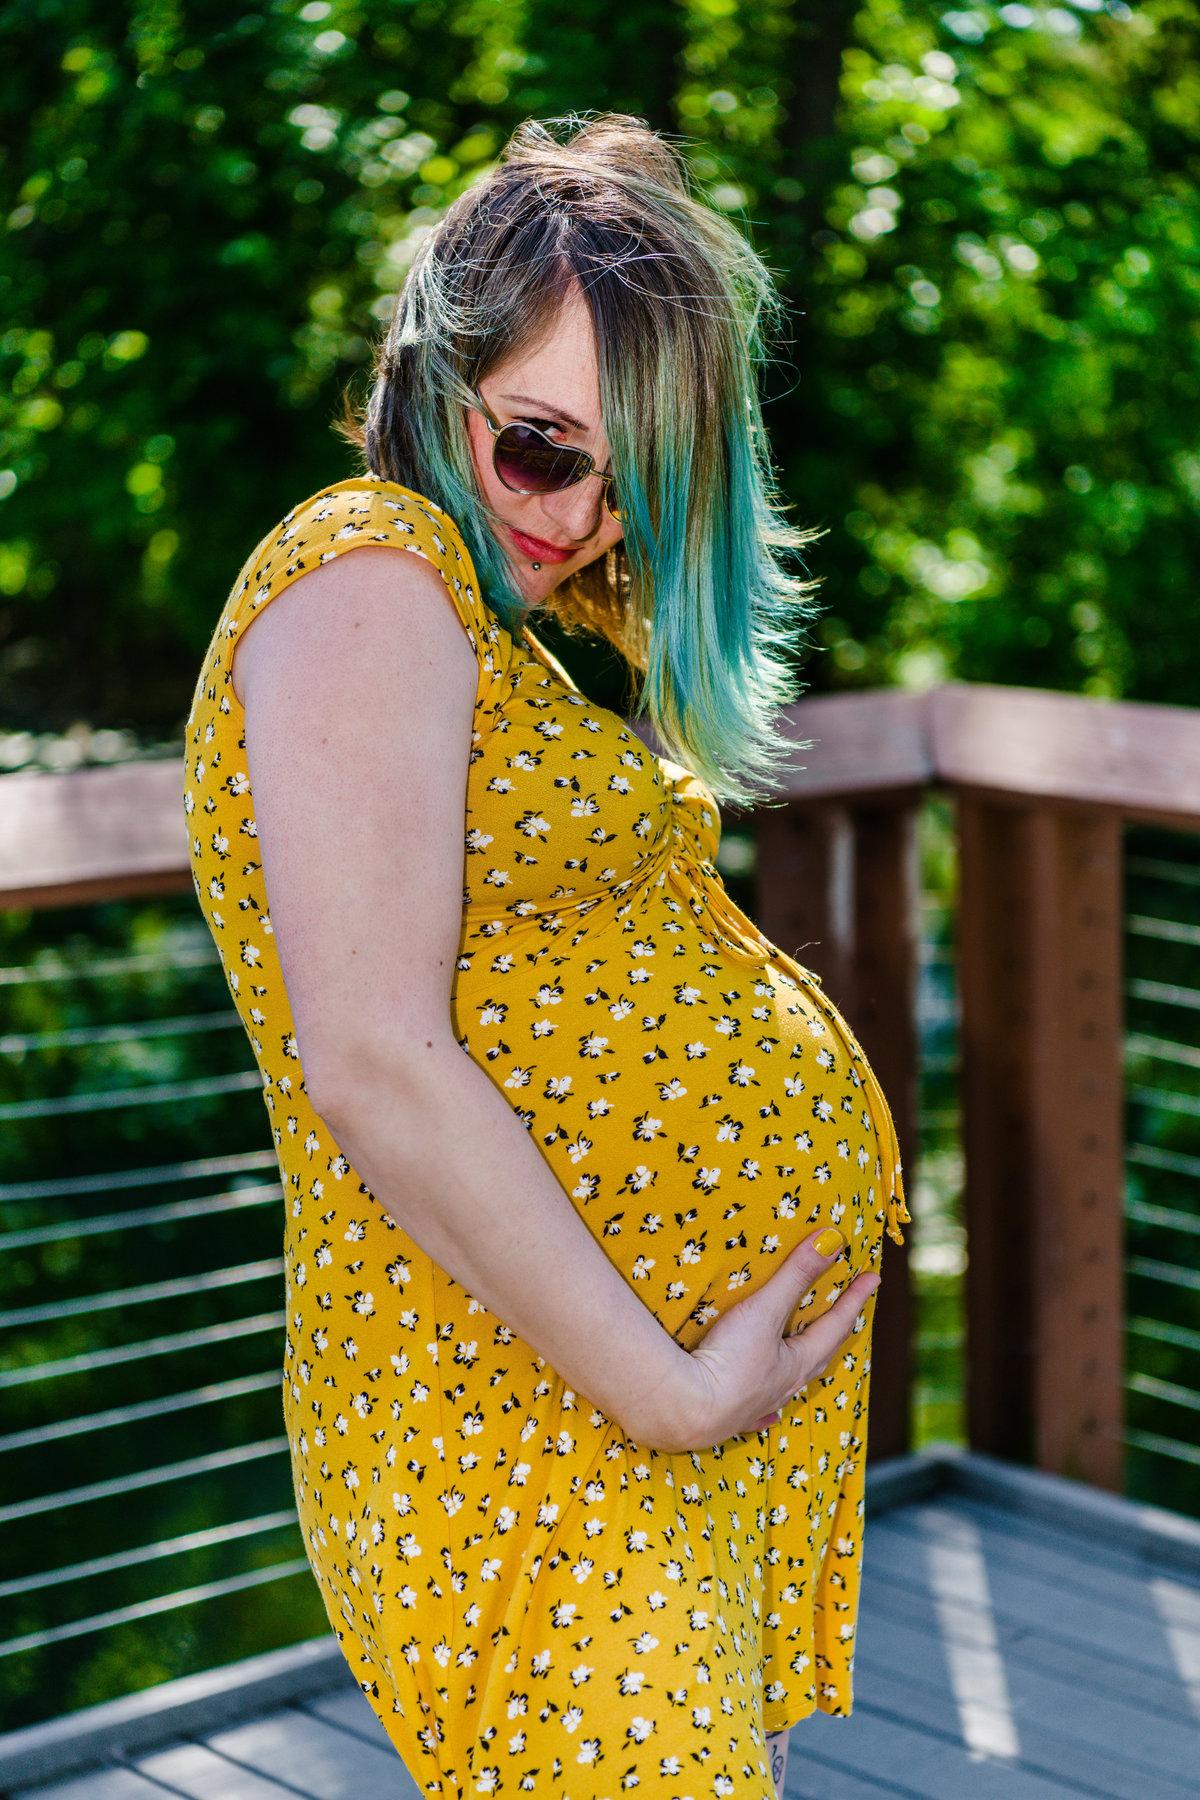 Pregnant woman with green hair and sunglasses holds stomach.